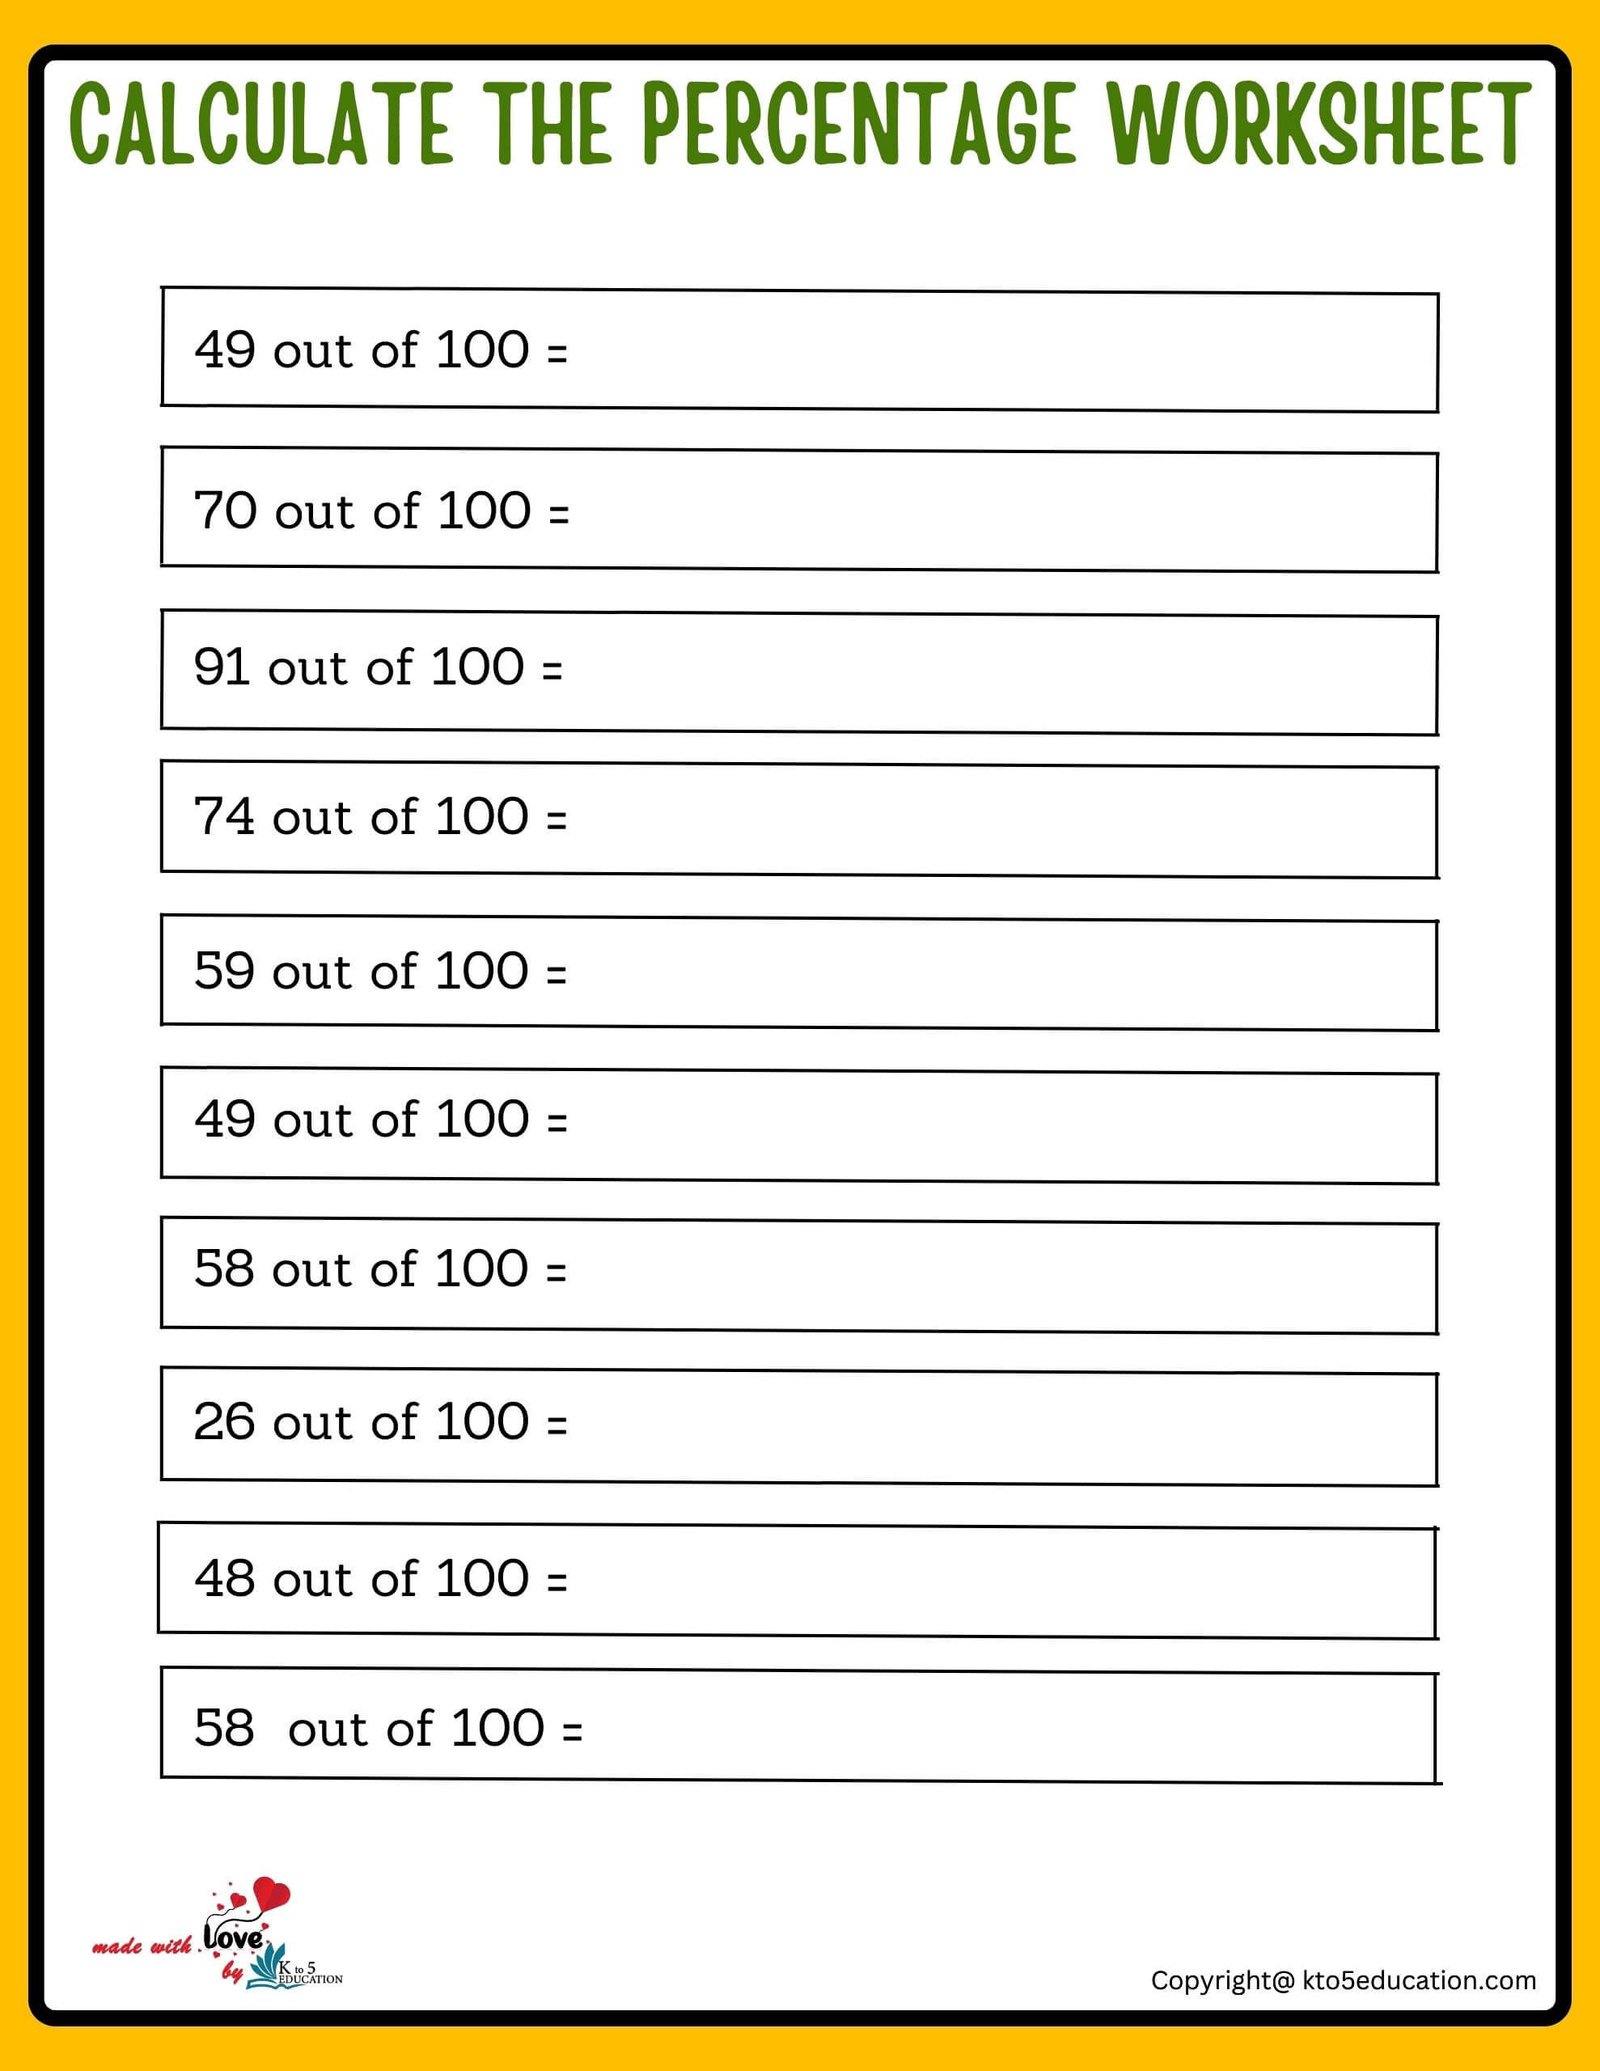 Calculate The Percentage Of 100 Worksheet